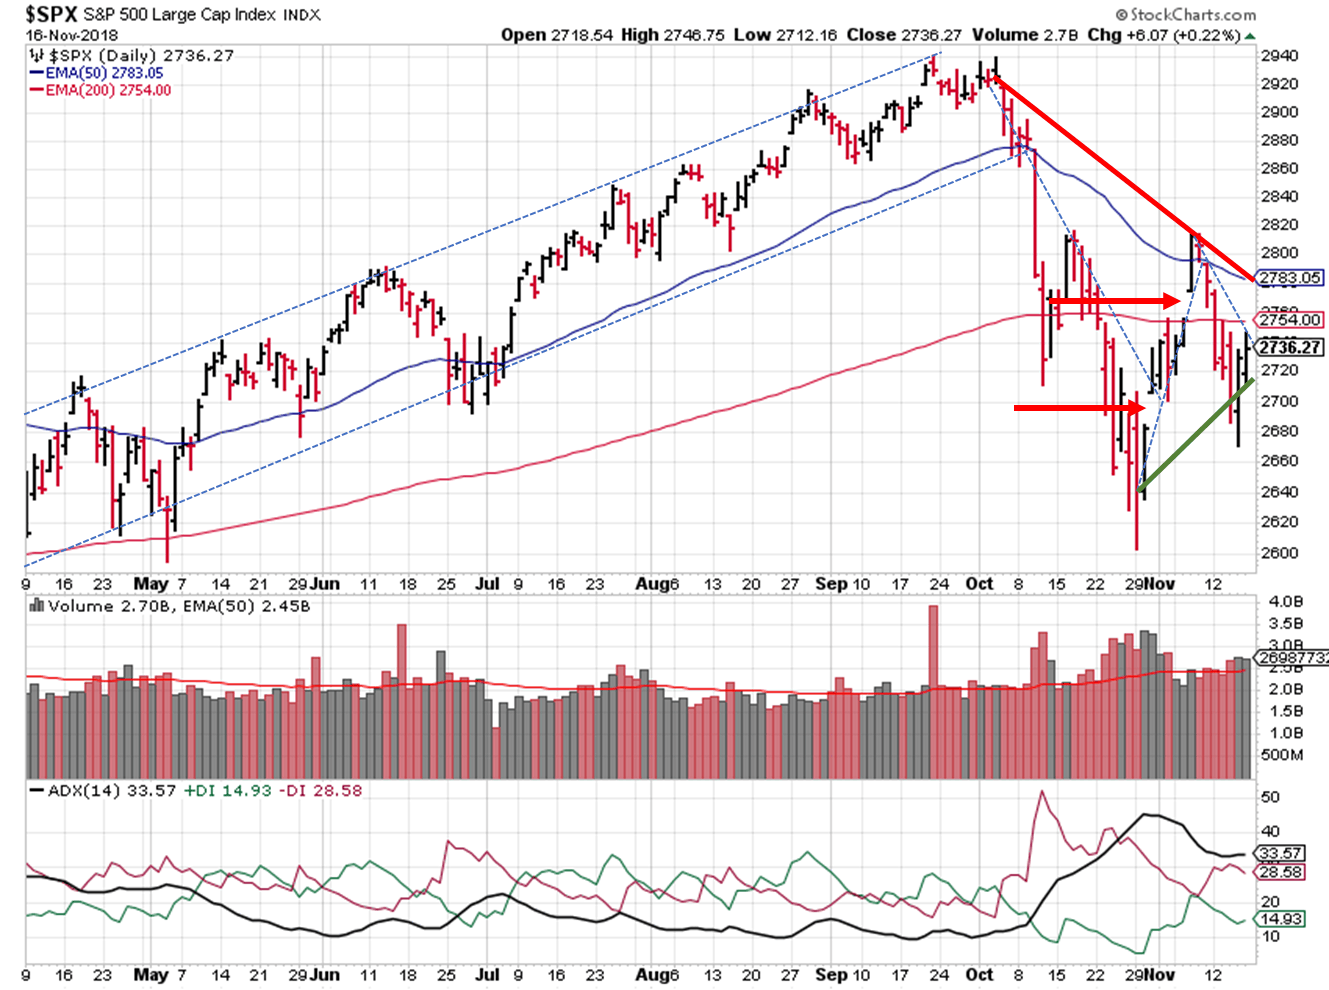 This image displays a candlestick chart of the s&p 500 stock market index, highlighting technical analysis indicators such as moving averages, trend lines, and volume data, along with a momentum indicator (adx) plotted beneath.